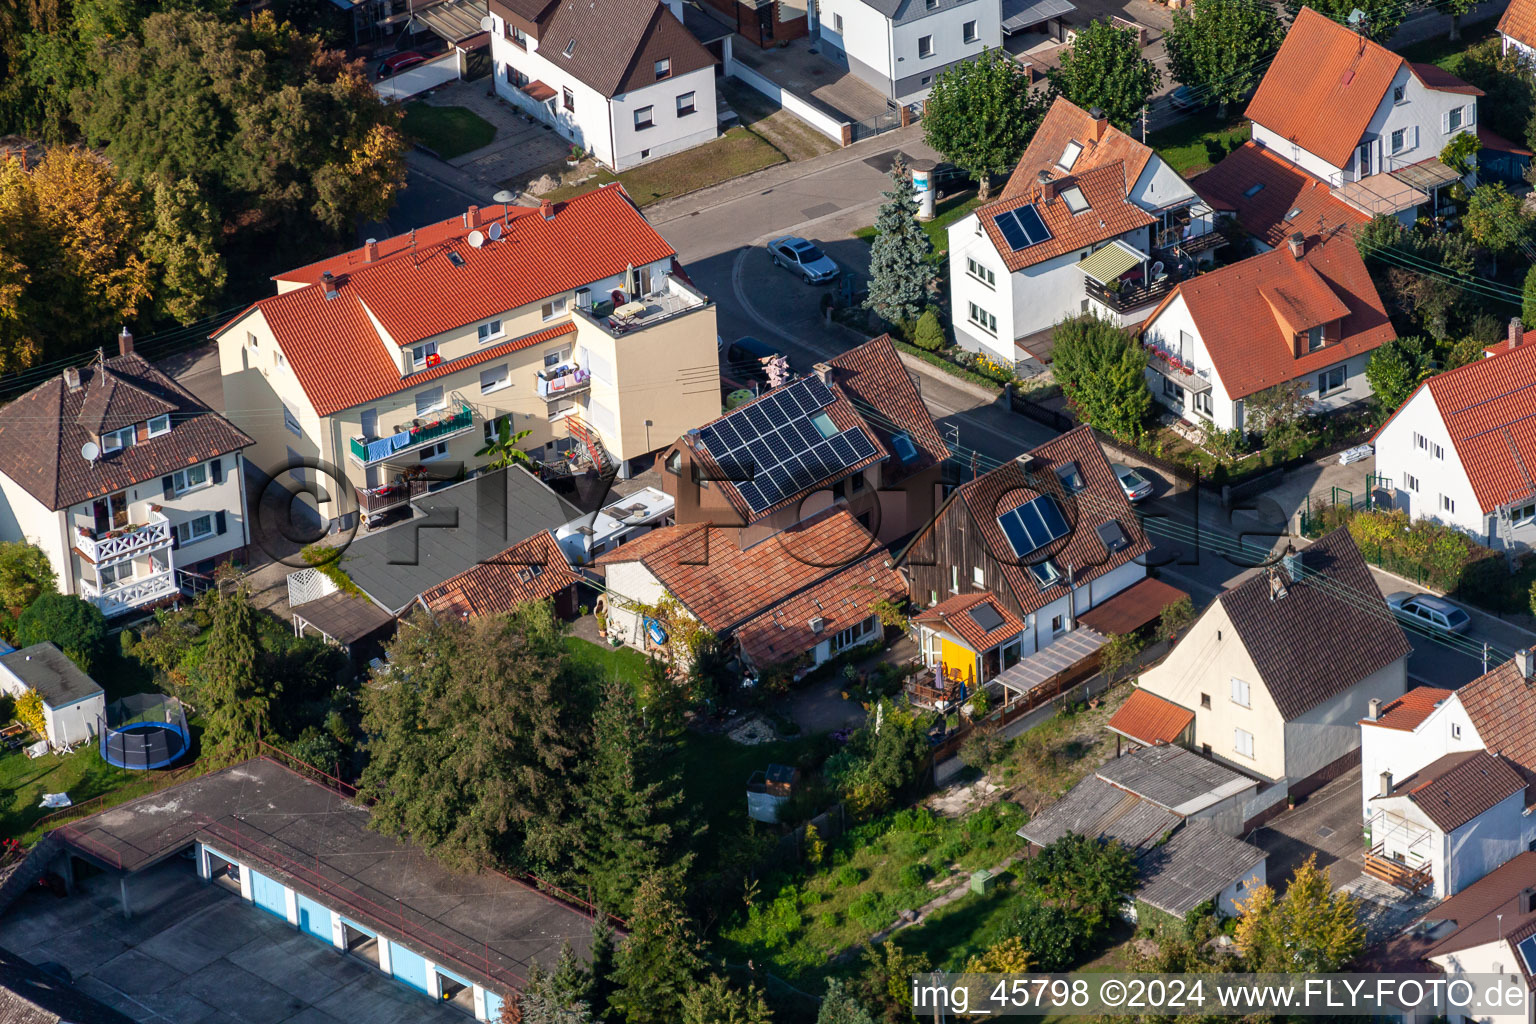 Drone image of Garden City settlement in Kandel in the state Rhineland-Palatinate, Germany